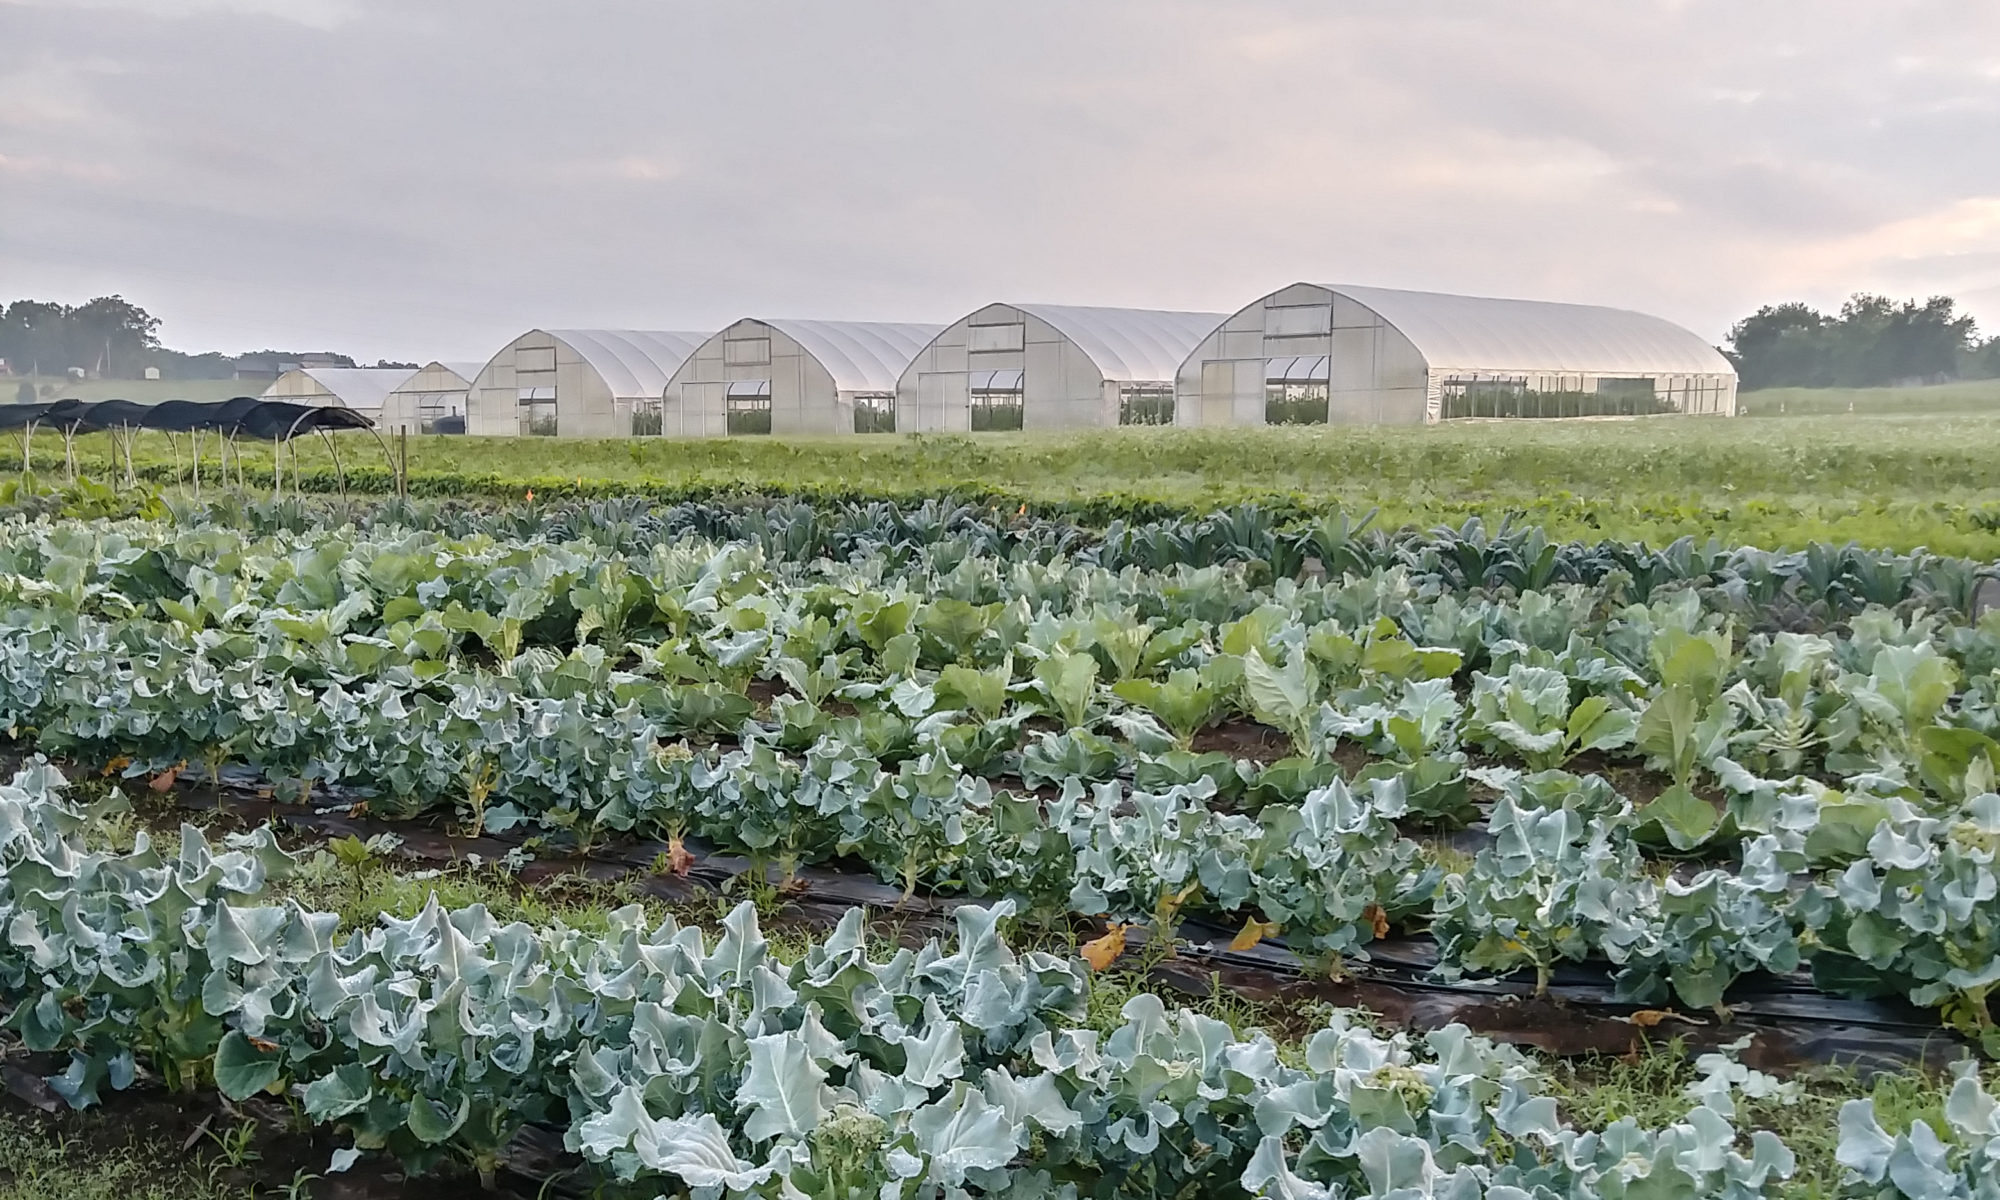 Picture of crops in front of a row of greenhouses